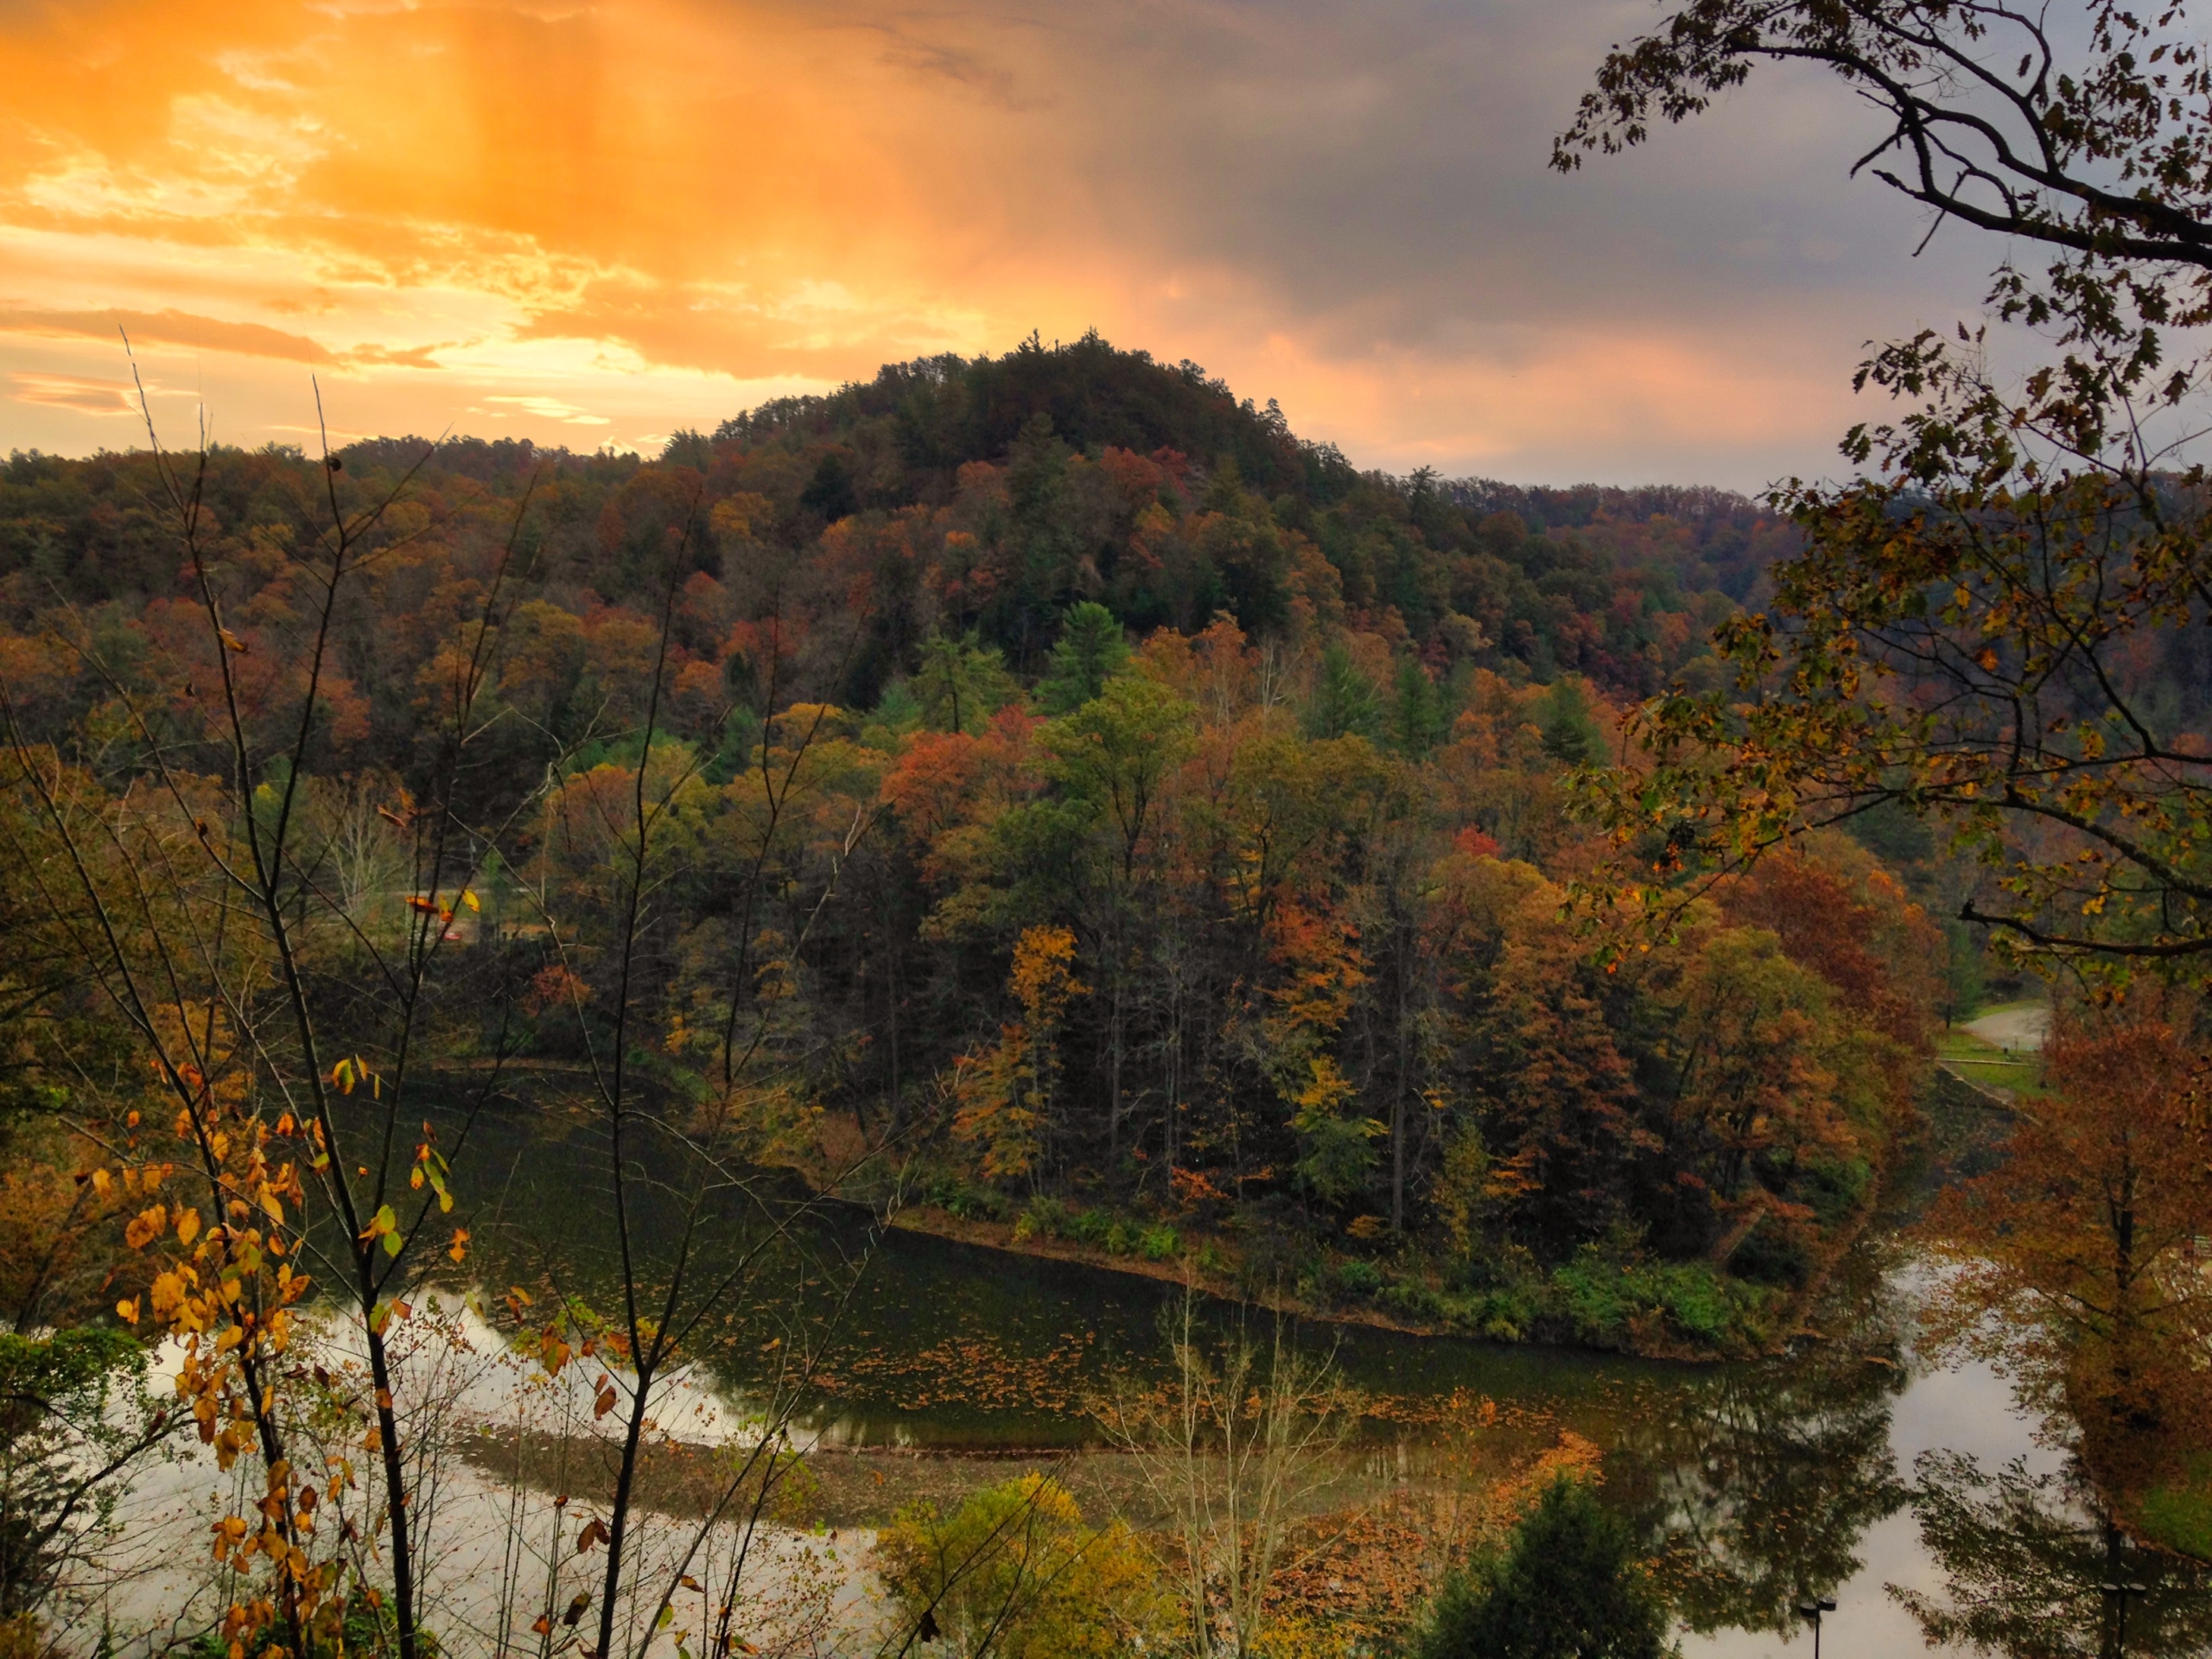 Green, orange, red, and yellow leaves of the trees on a mountain forest overlooking a lake with the reflection of the setting sun in the water